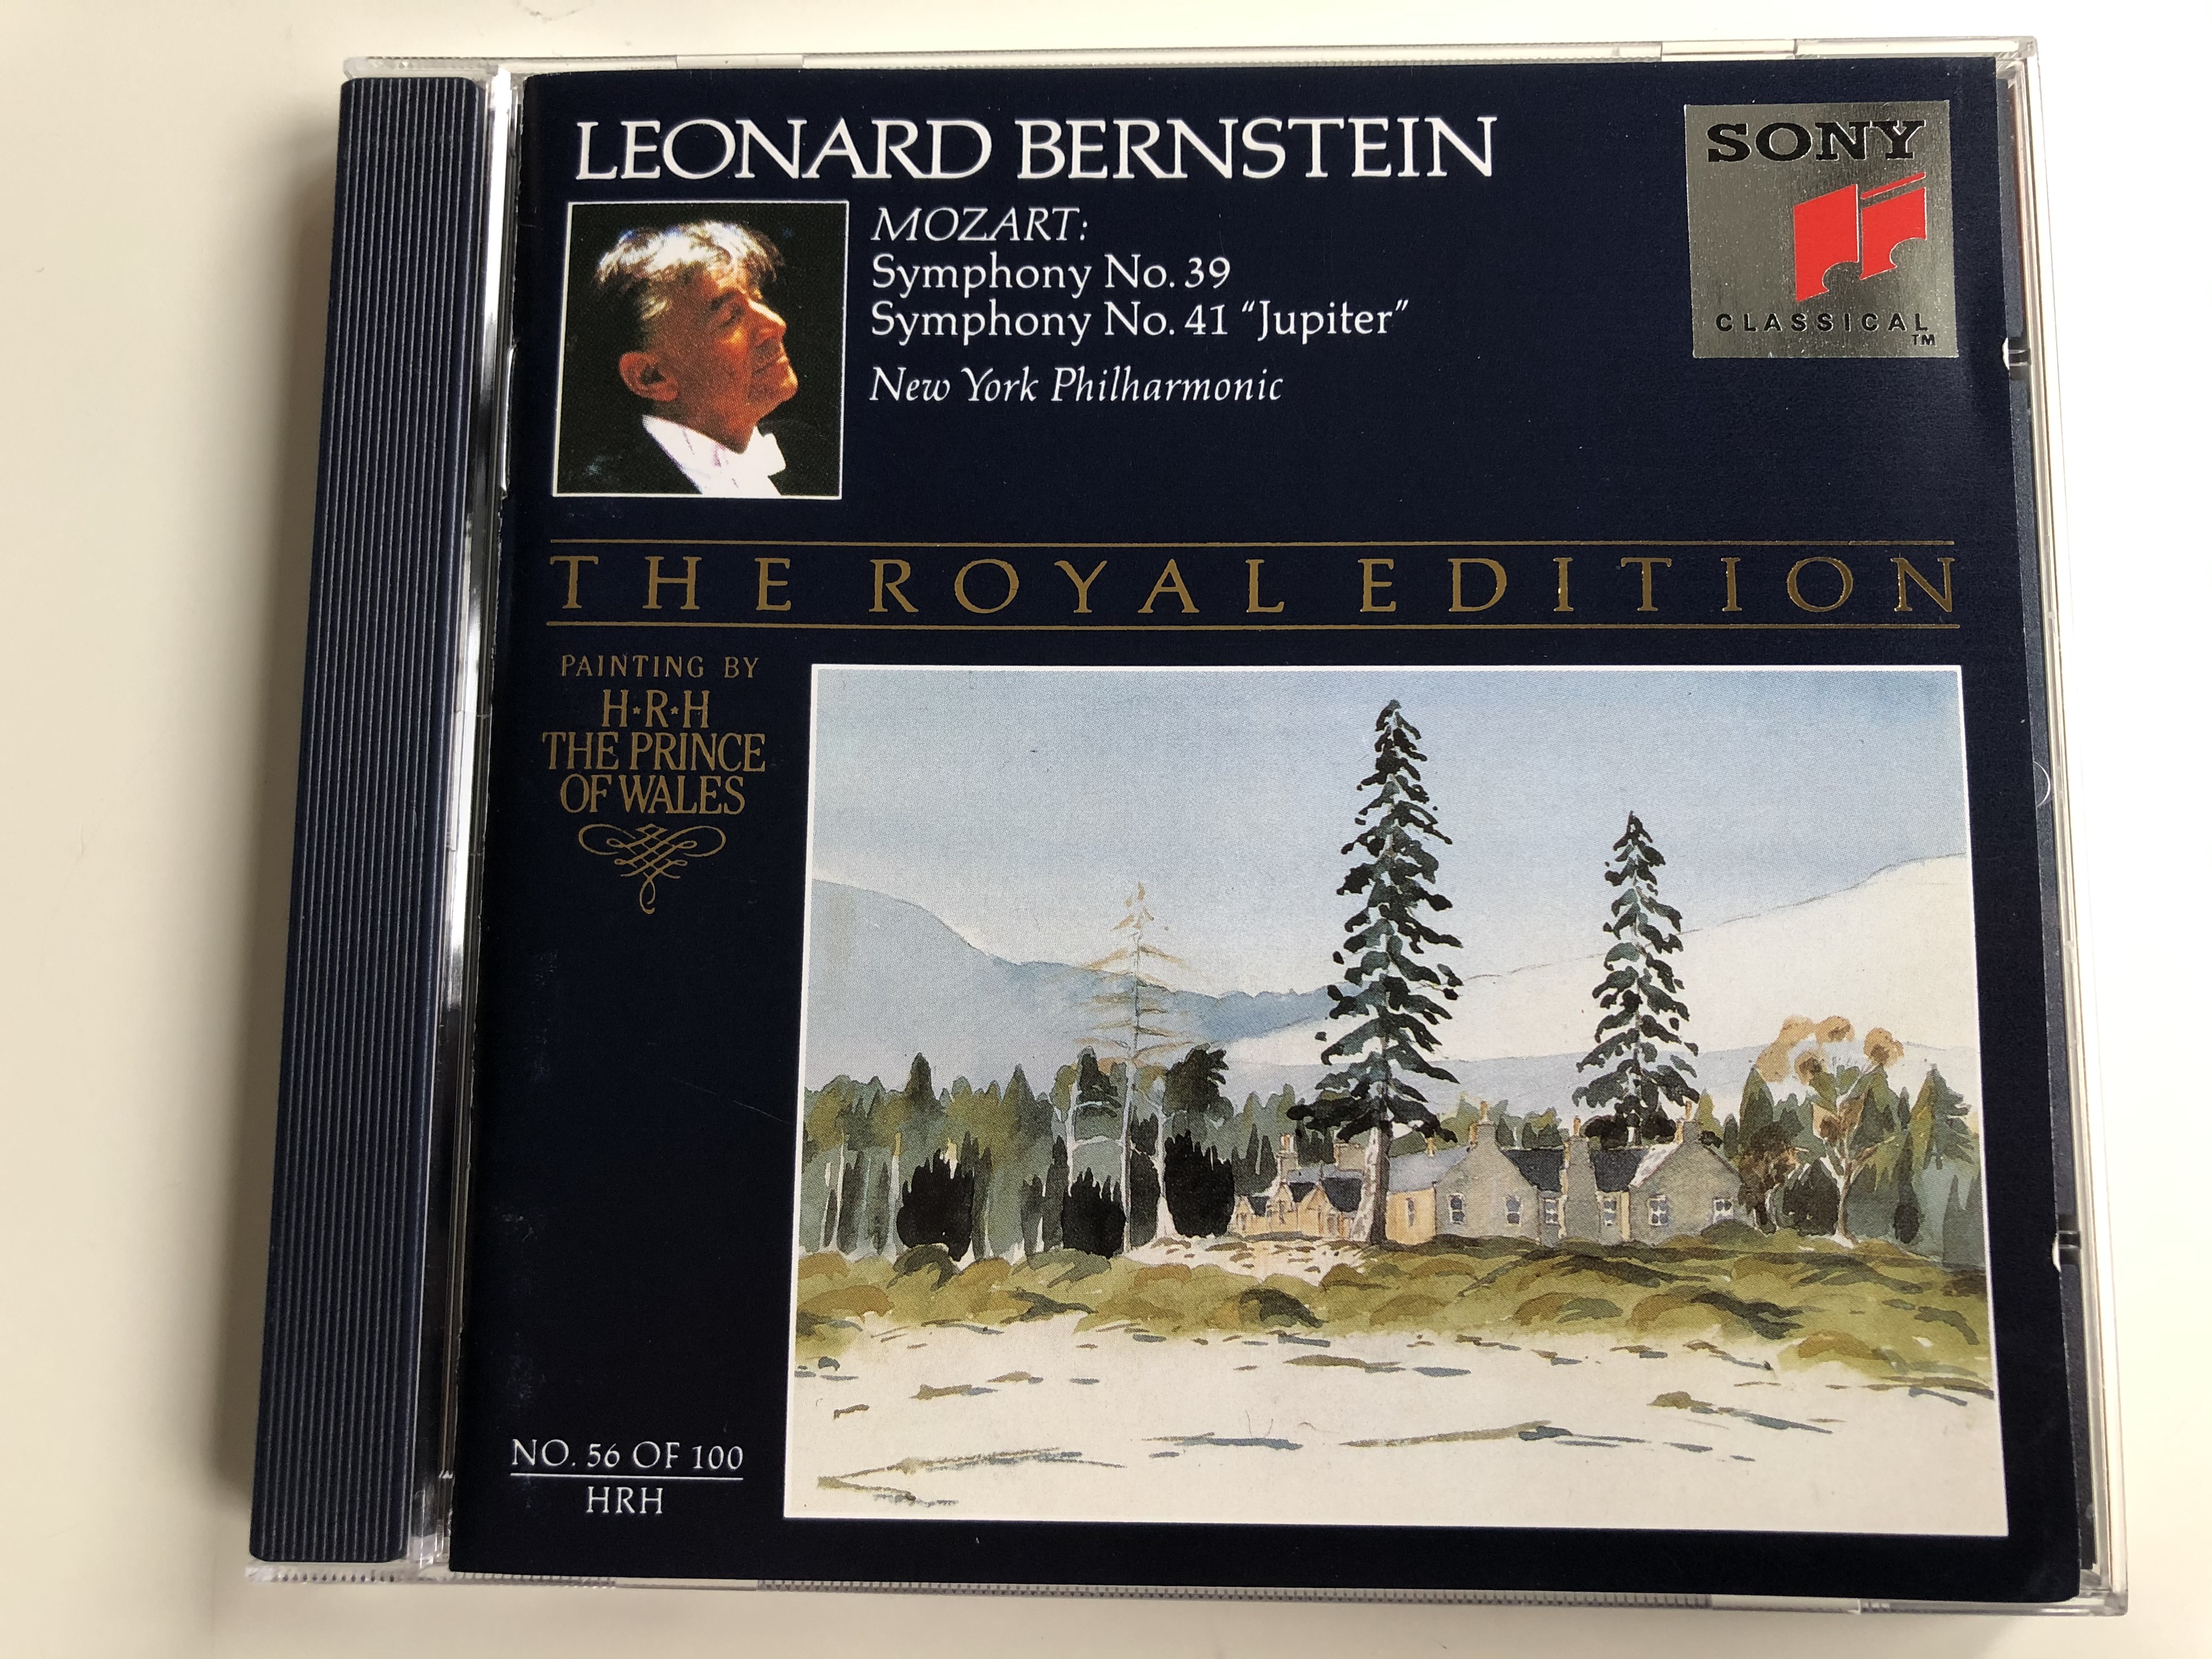 leonard-bernstein-mozart-symphony-no.39-symphony-no.41-jupiter-new-york-philharmonic-the-royal-edition-painting-by-h.r.h.-the-prince-of-wales-no.-56-of-100-hrh-sony-classical-audio-cd-1993-1-.jpg